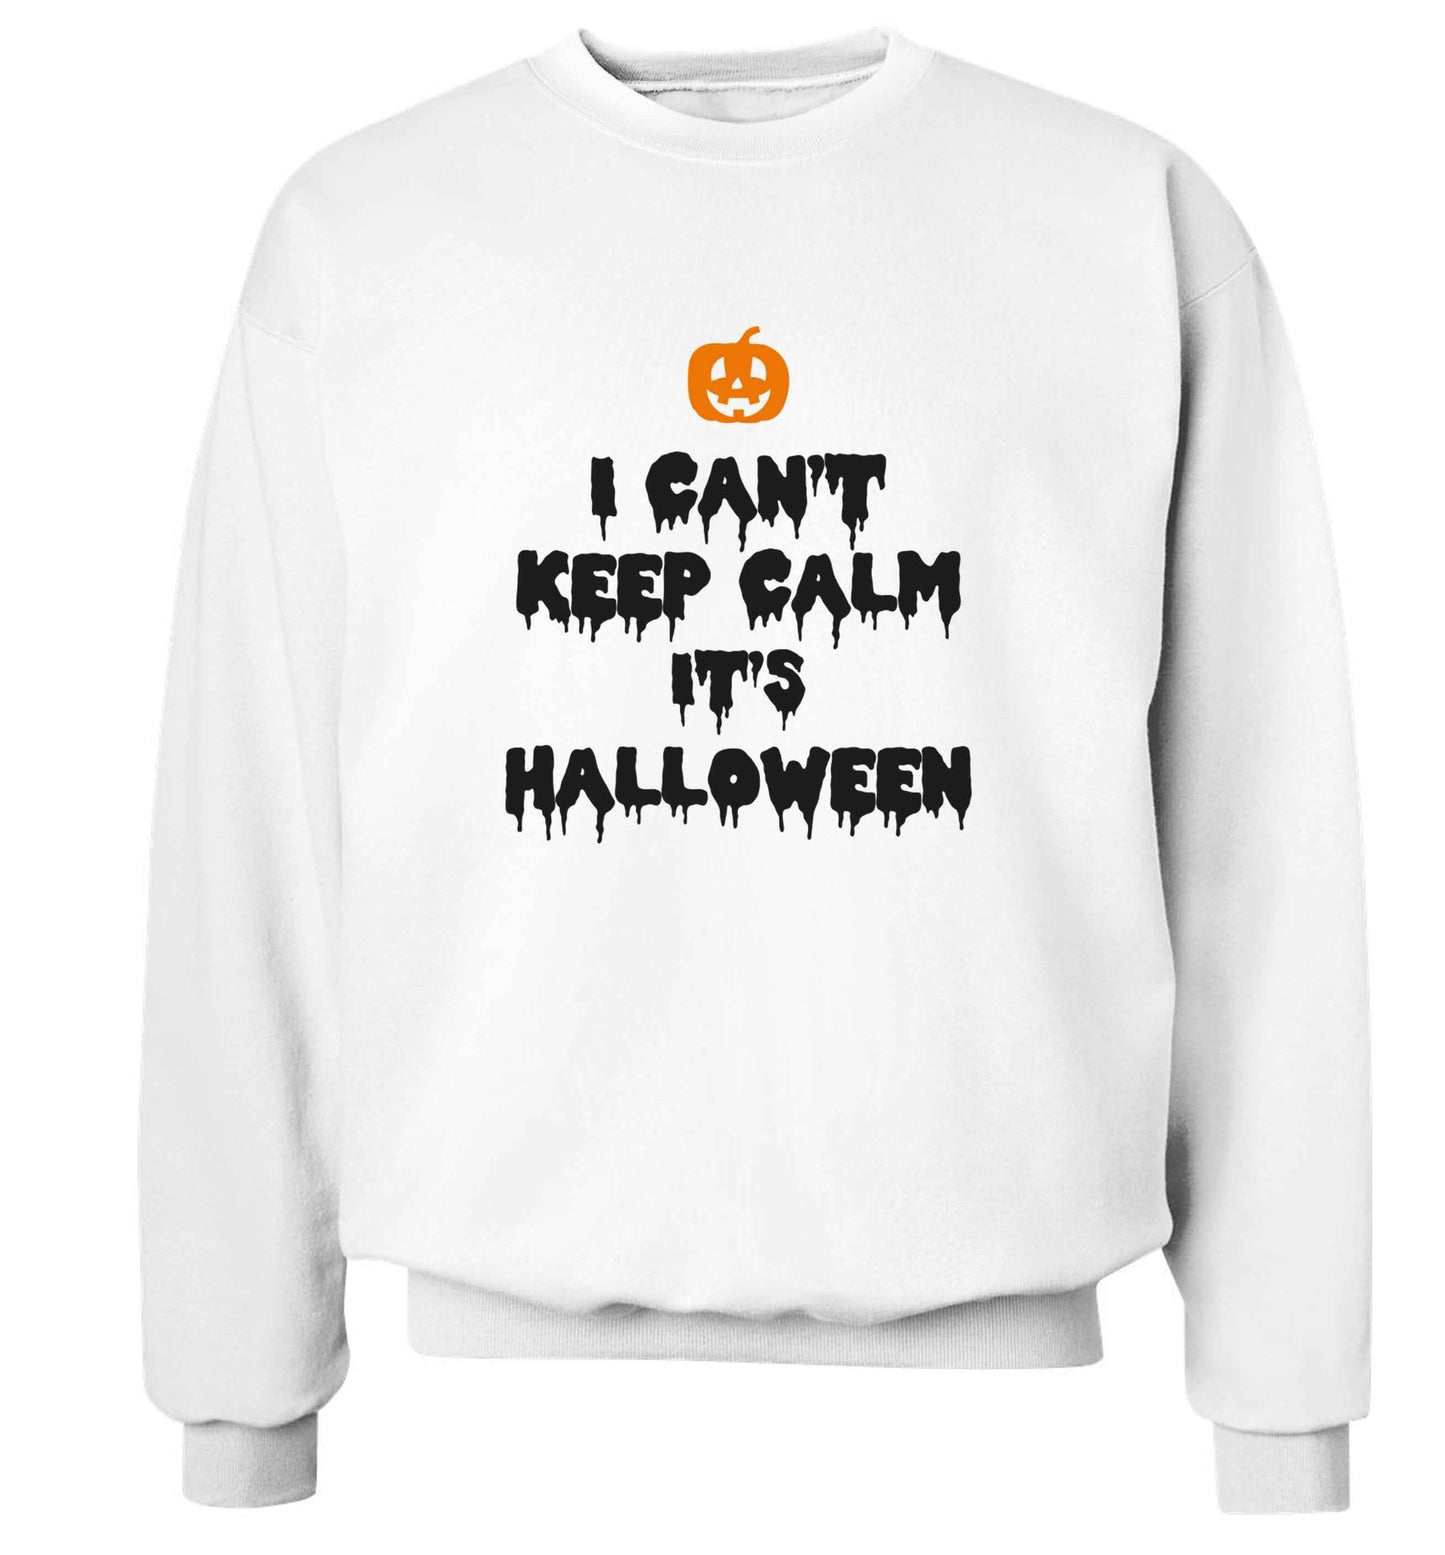 I can't keep calm it's halloween adult's unisex white sweater 2XL